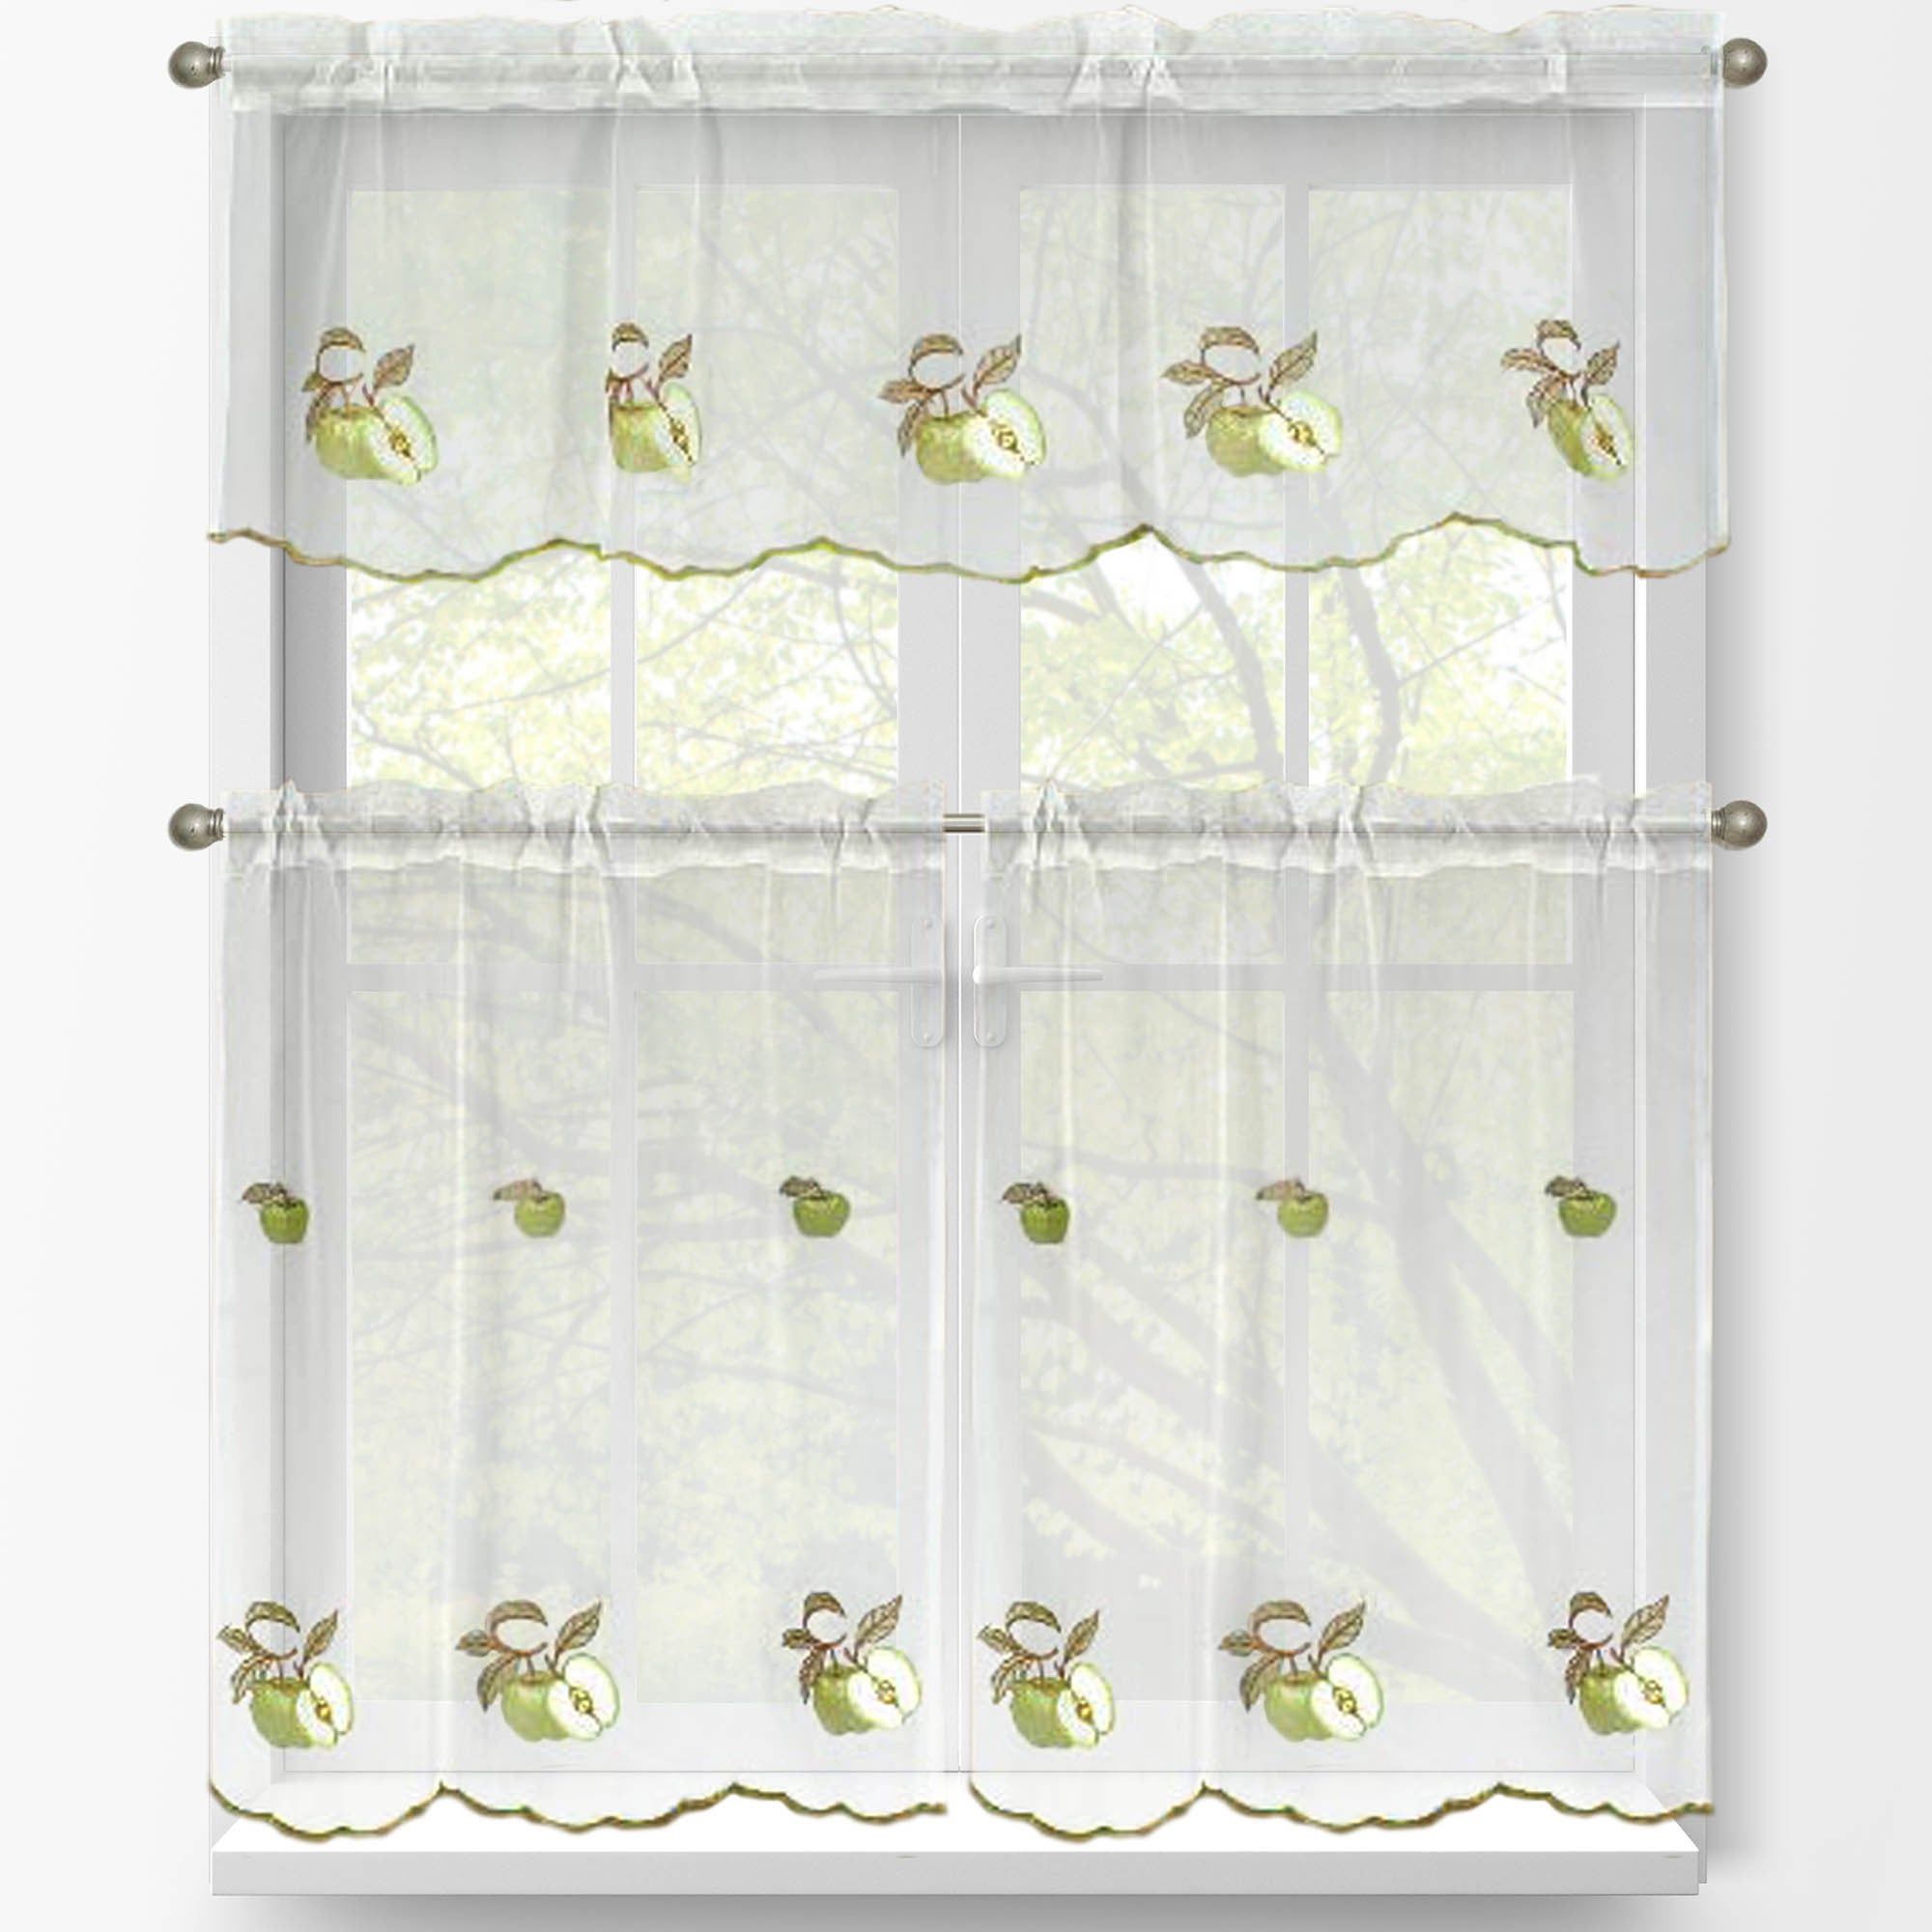 Window Elements Embroidered 3 Piece Kitchen Tier And Valance Set Pertaining To Coffee Drinks Embroidered Window Valances And Tiers (View 20 of 20)